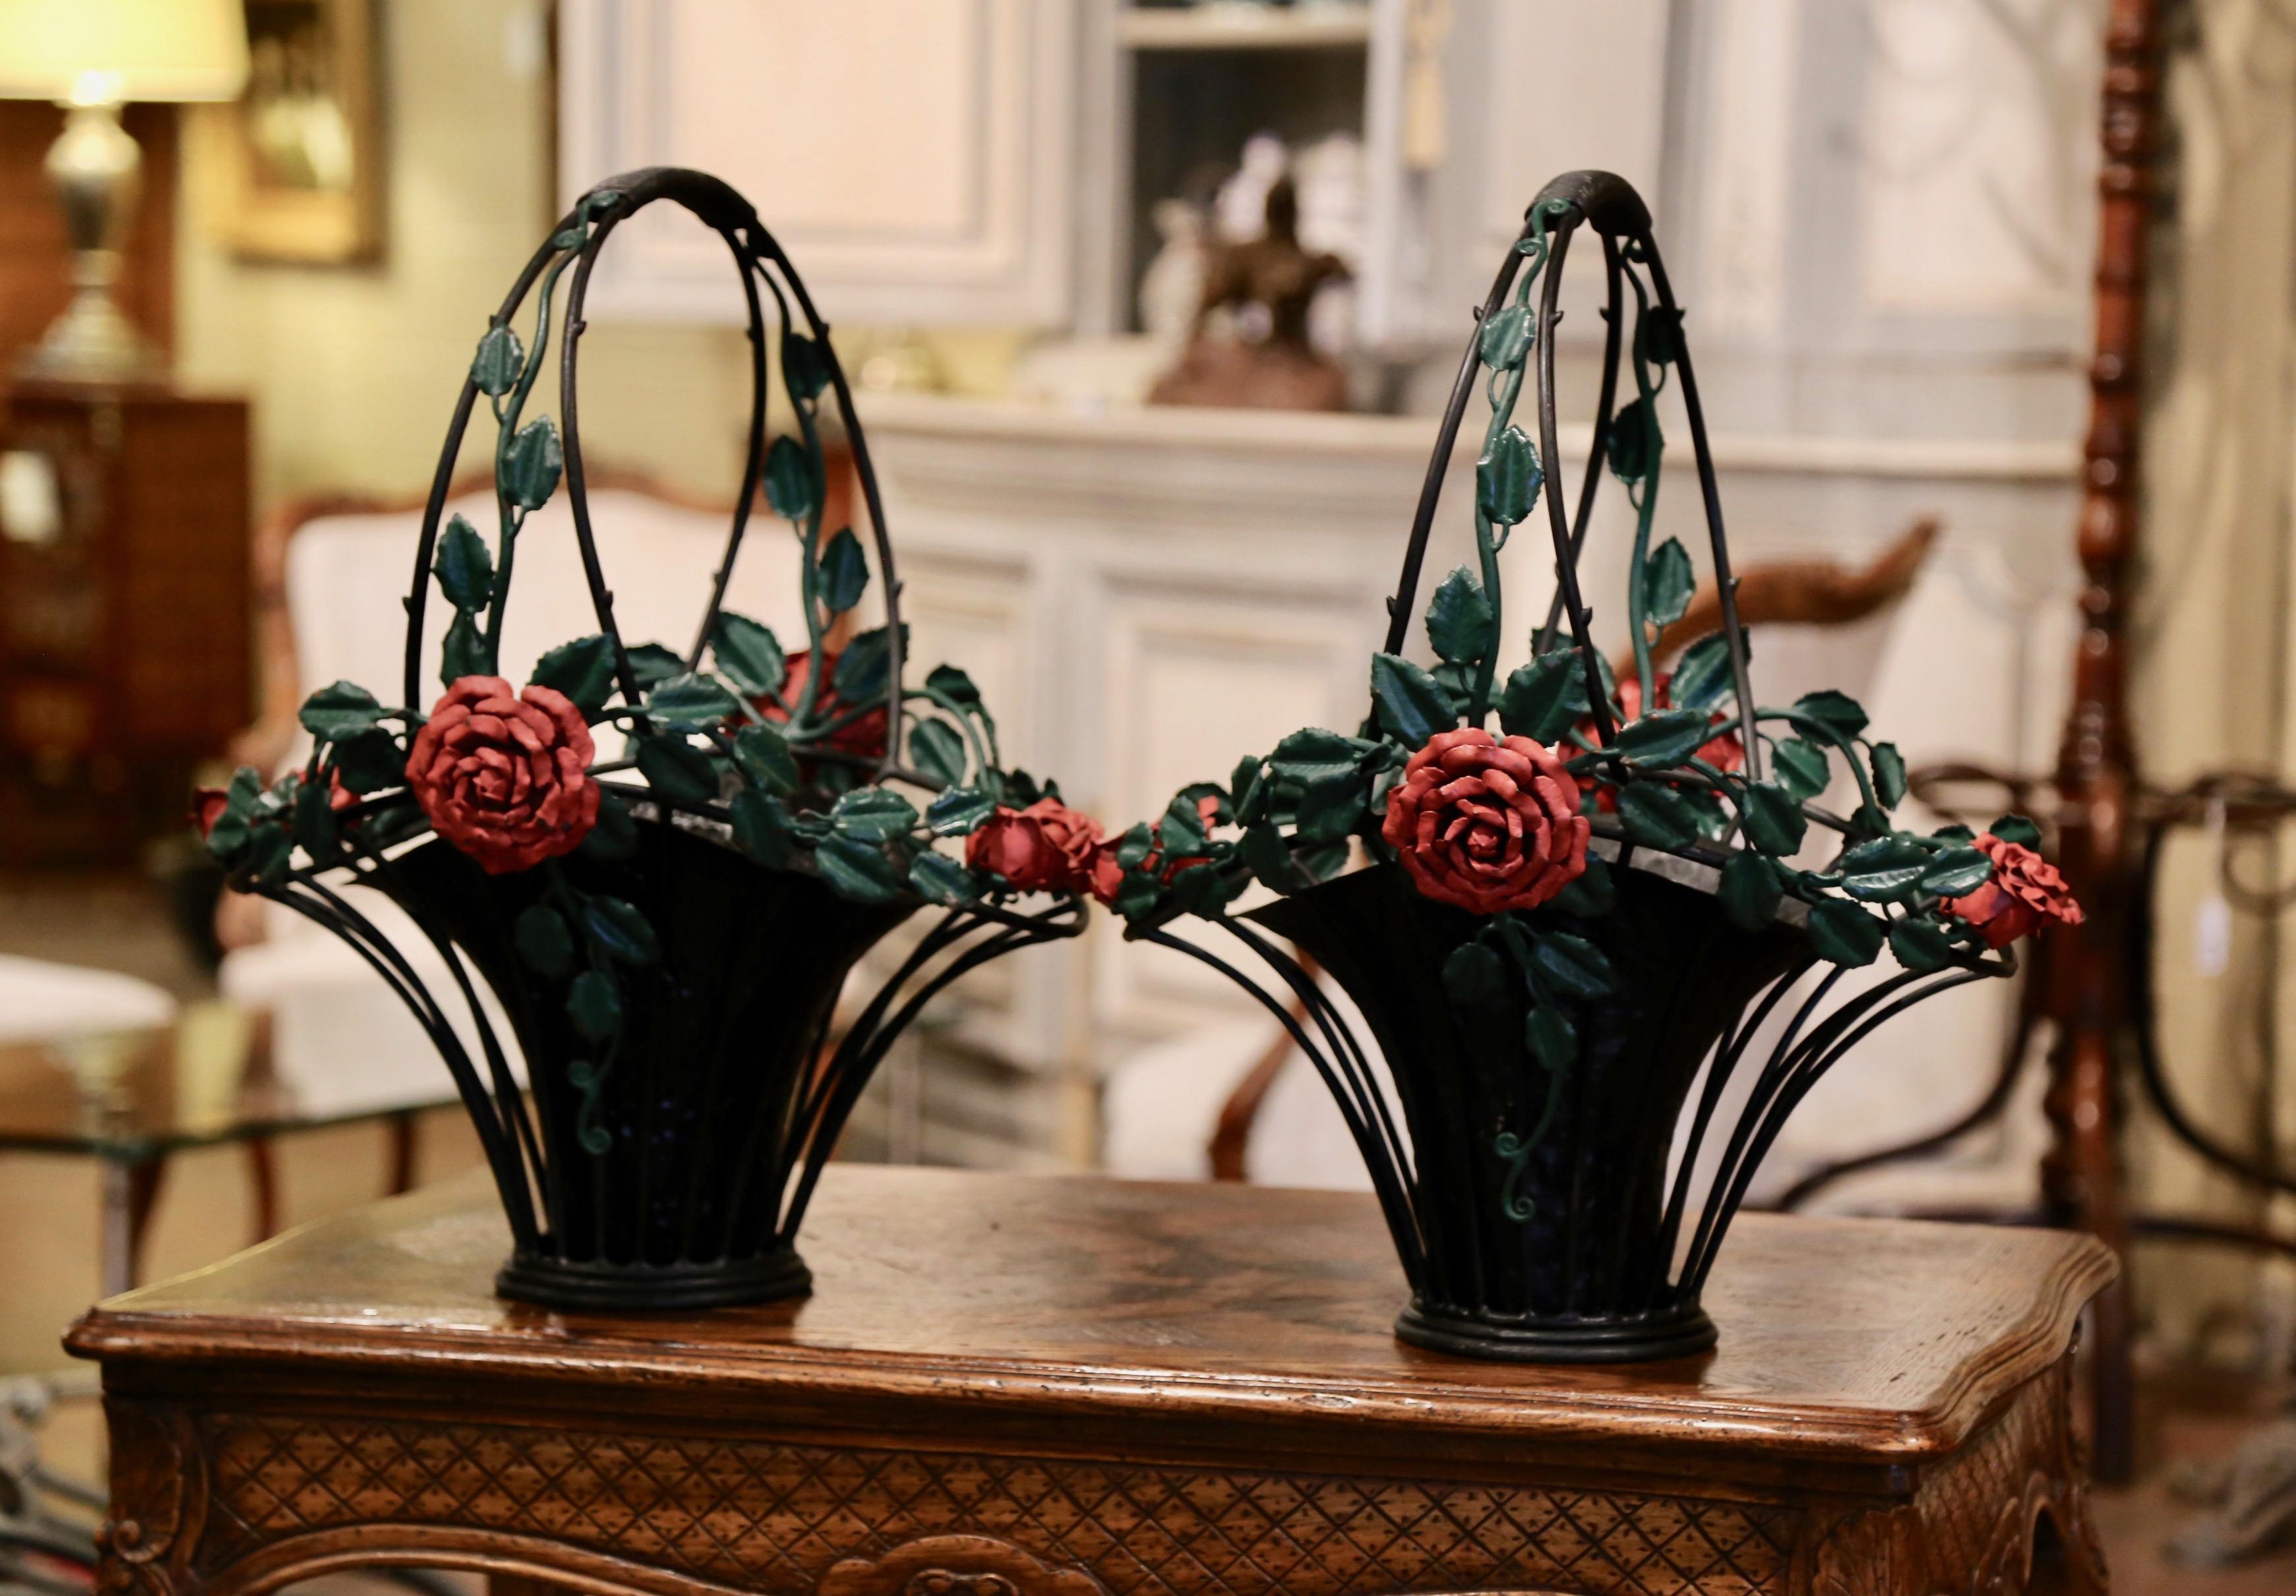 For inside or outside use, these elegant antique baskets were crafted in France circa 1950, made of heavy metal, the large jardinières with tall handles, feature hand painted flowers and leaves around the pierced rim in the red and green palette.